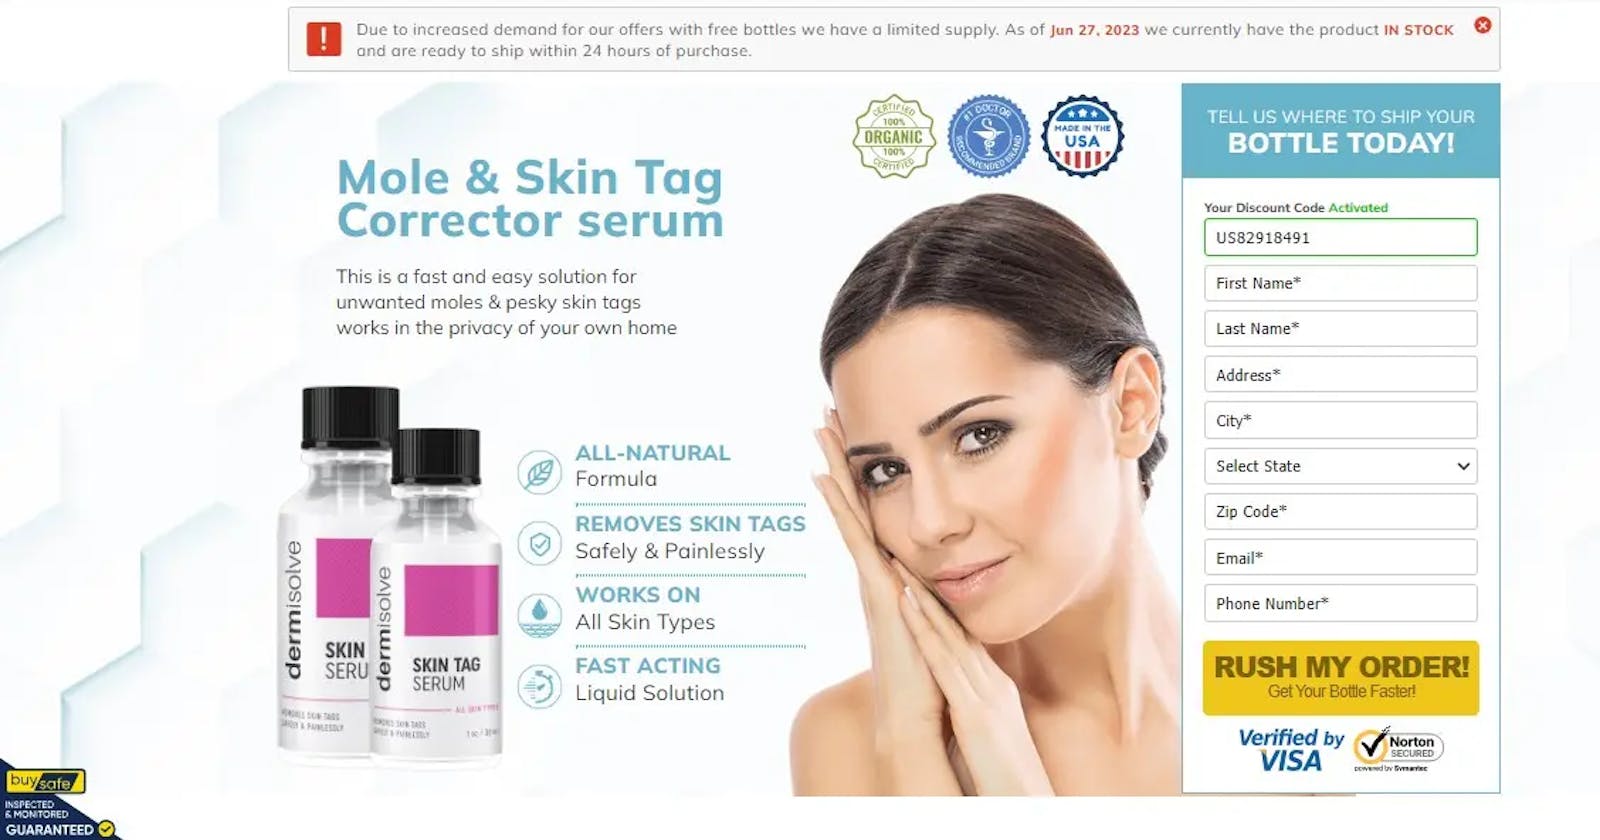 Dermisolve Skin Tag Remover gel Reviews (Legit Or Scam) is it trusted or Fake?